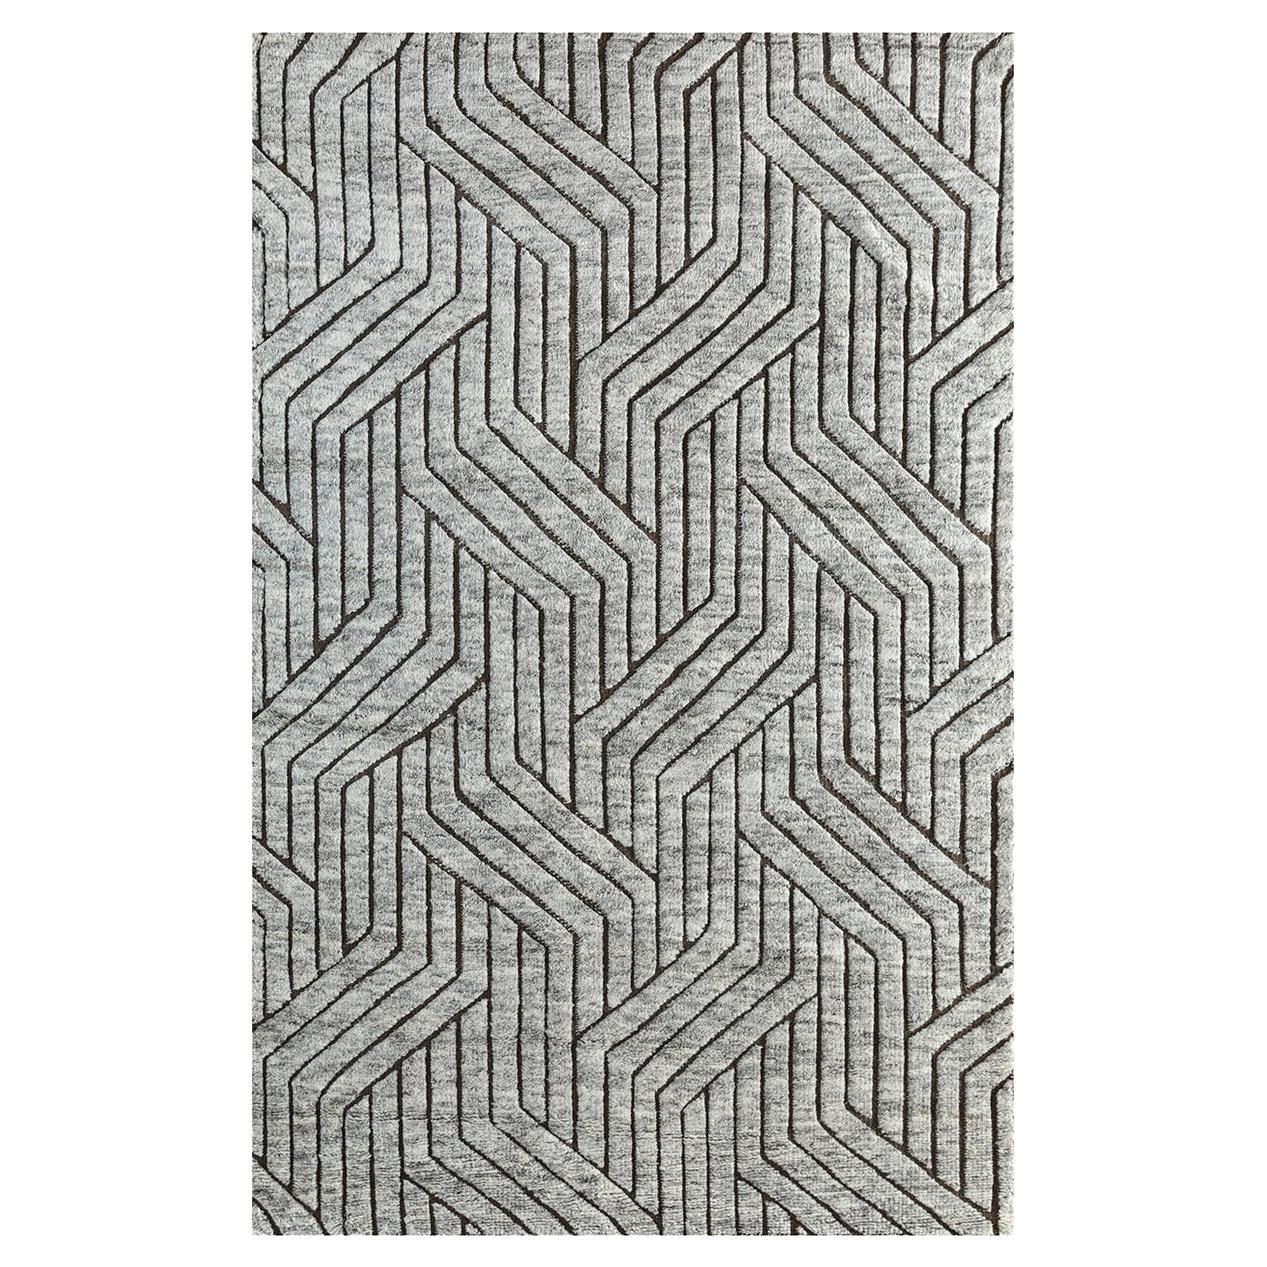 Weave Rug by Rural Weavers, Knotted, Wool, 240x300cm